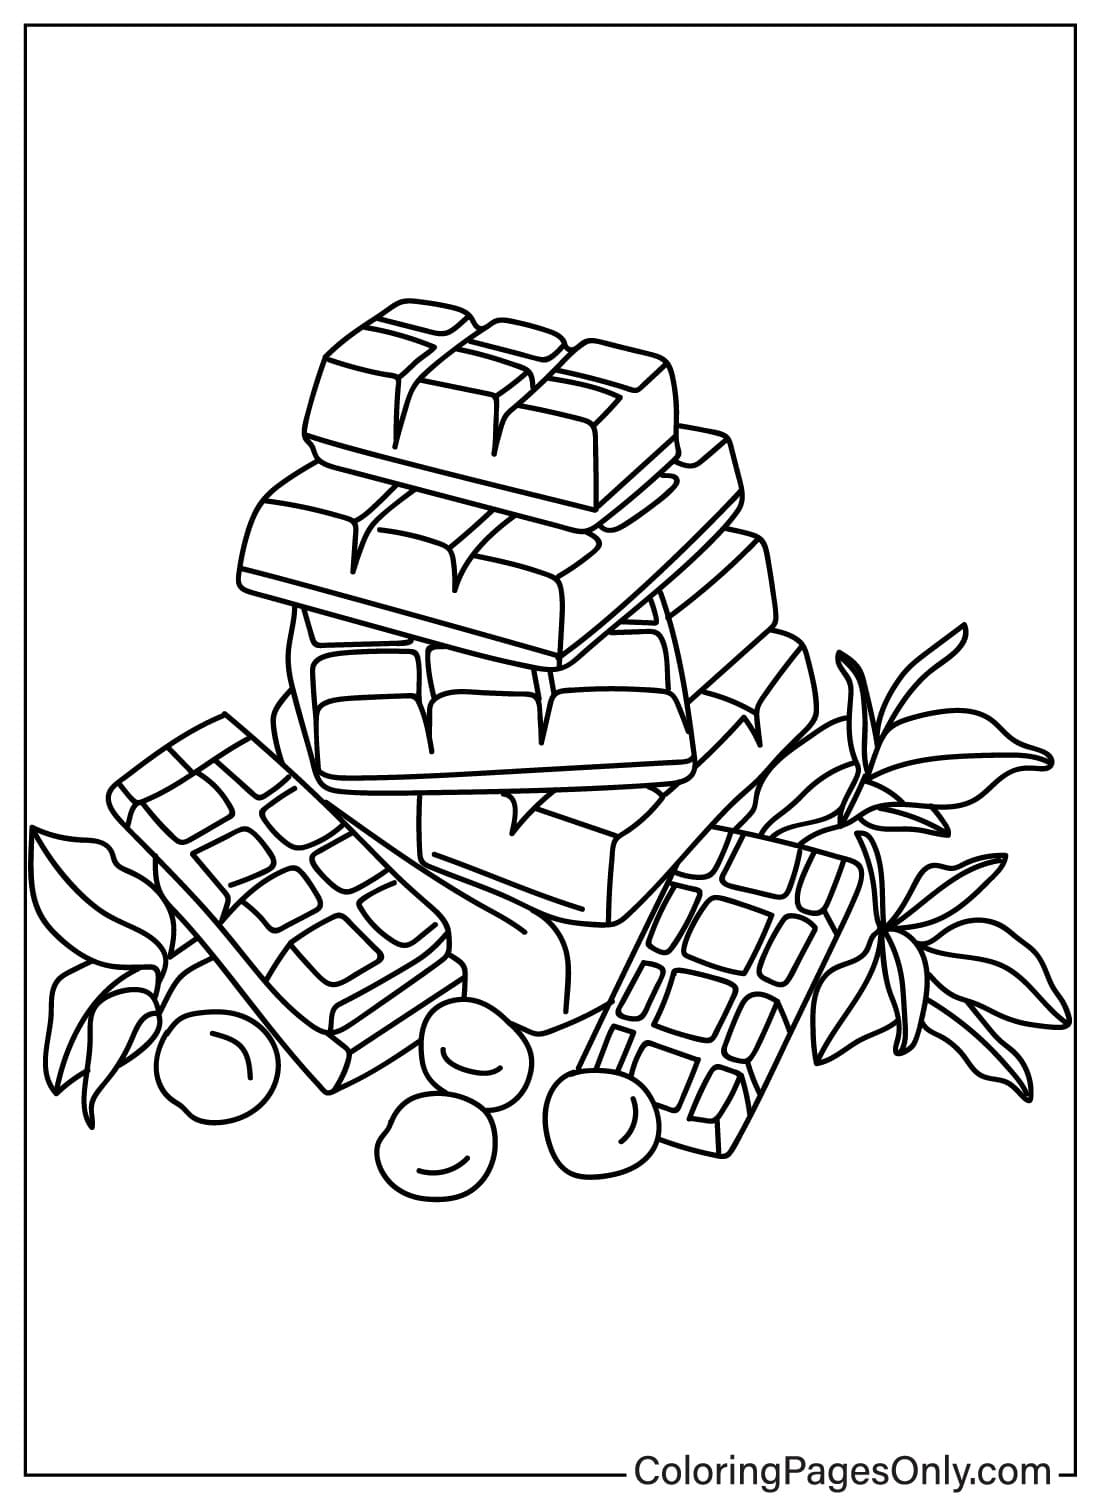 Chocolate Coloring Page from Chocolate